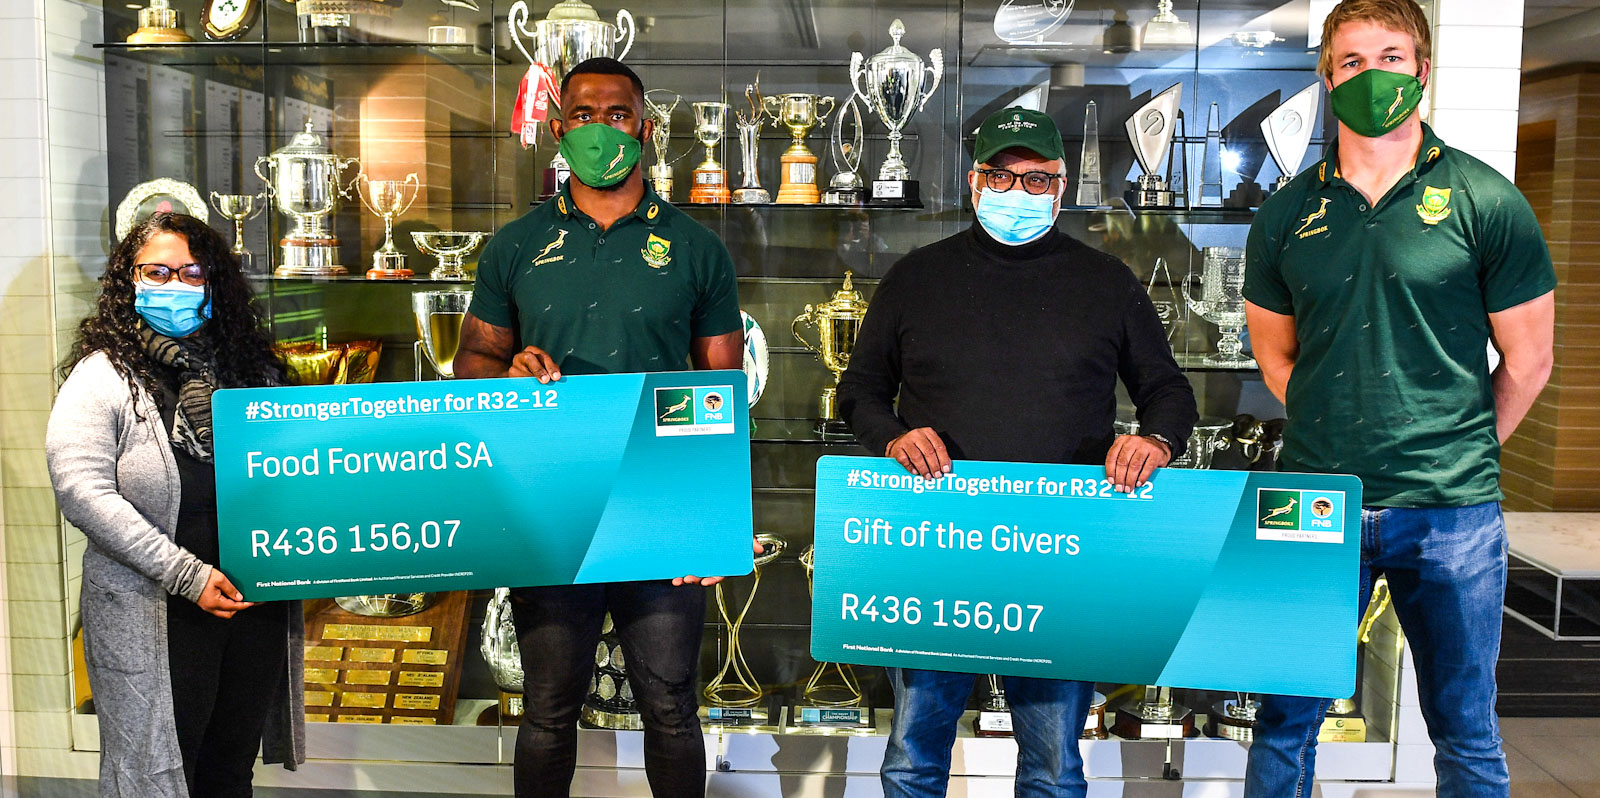 Siya Kolisi and Pieter-Steph du Toit hand over the money raised during the #StrongerTogether for R32-12 campaign